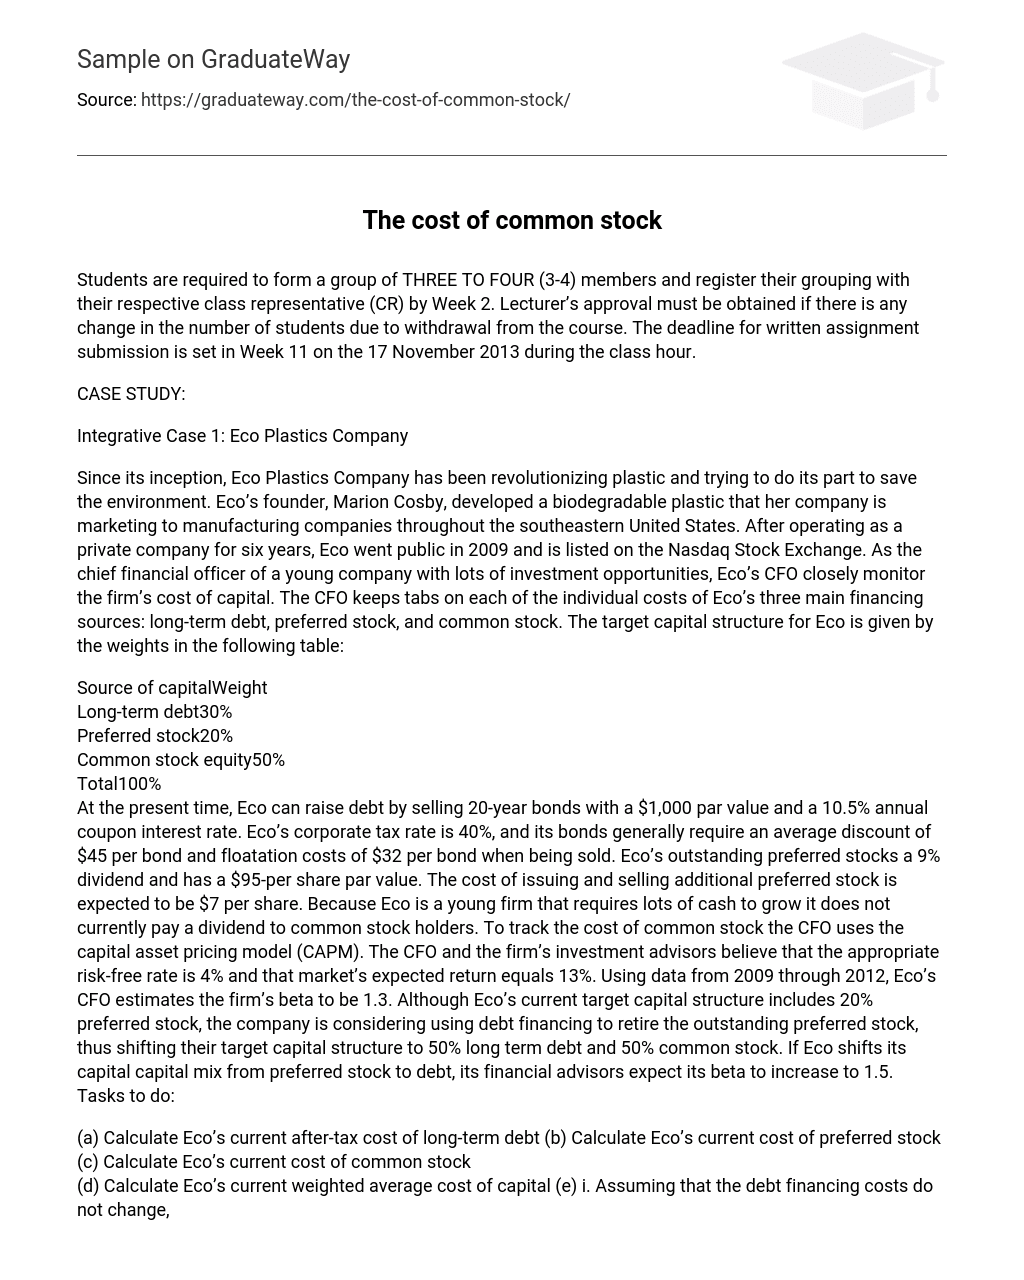 The cost of common stock